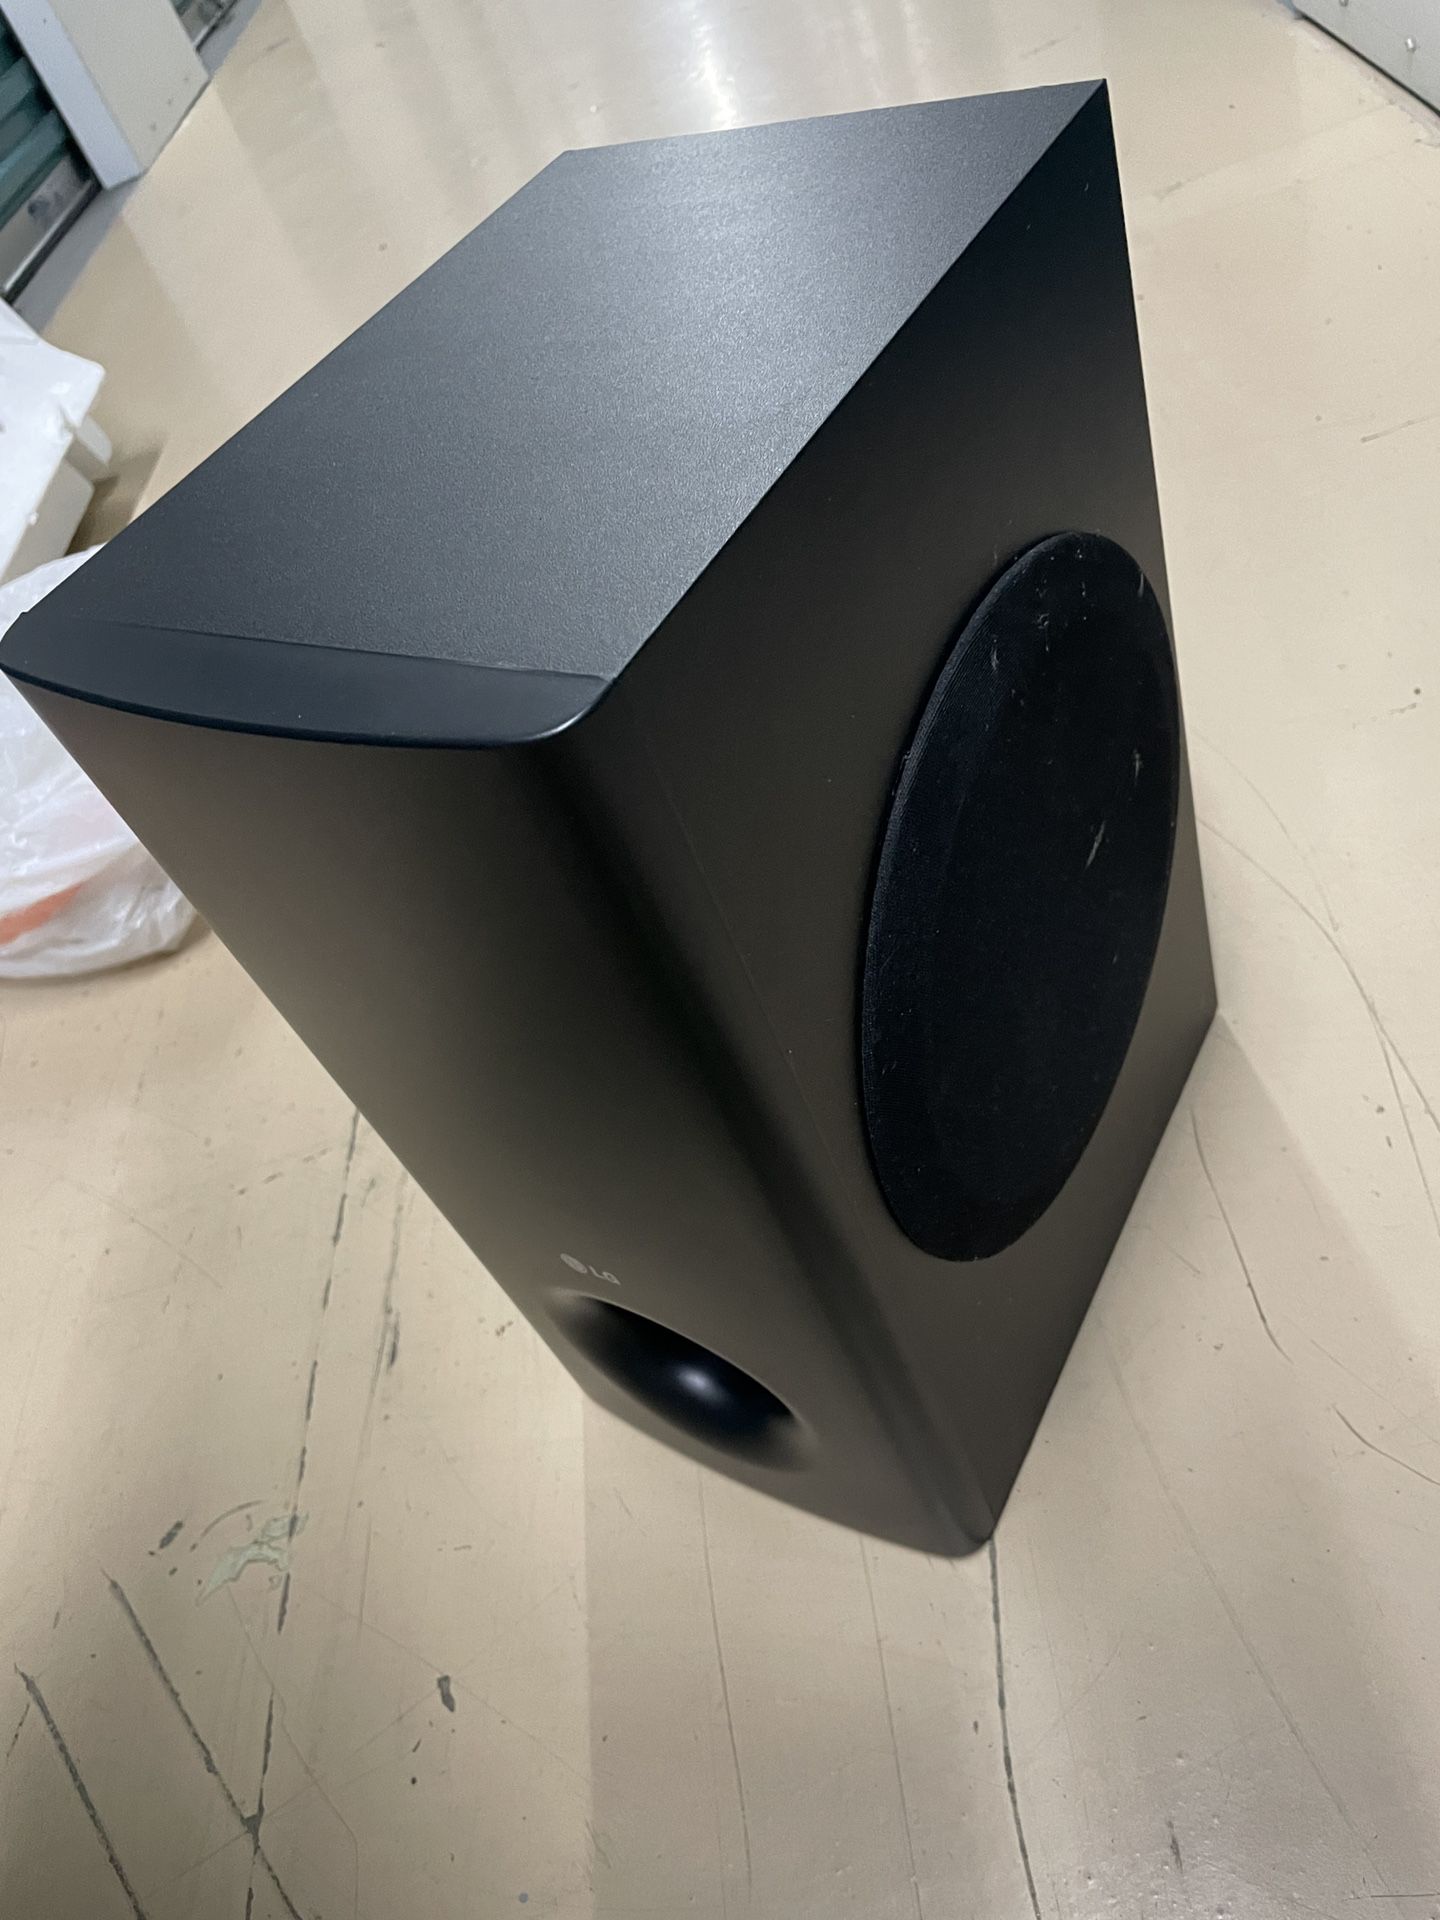 400W LG Subwoofer Works Perfectly